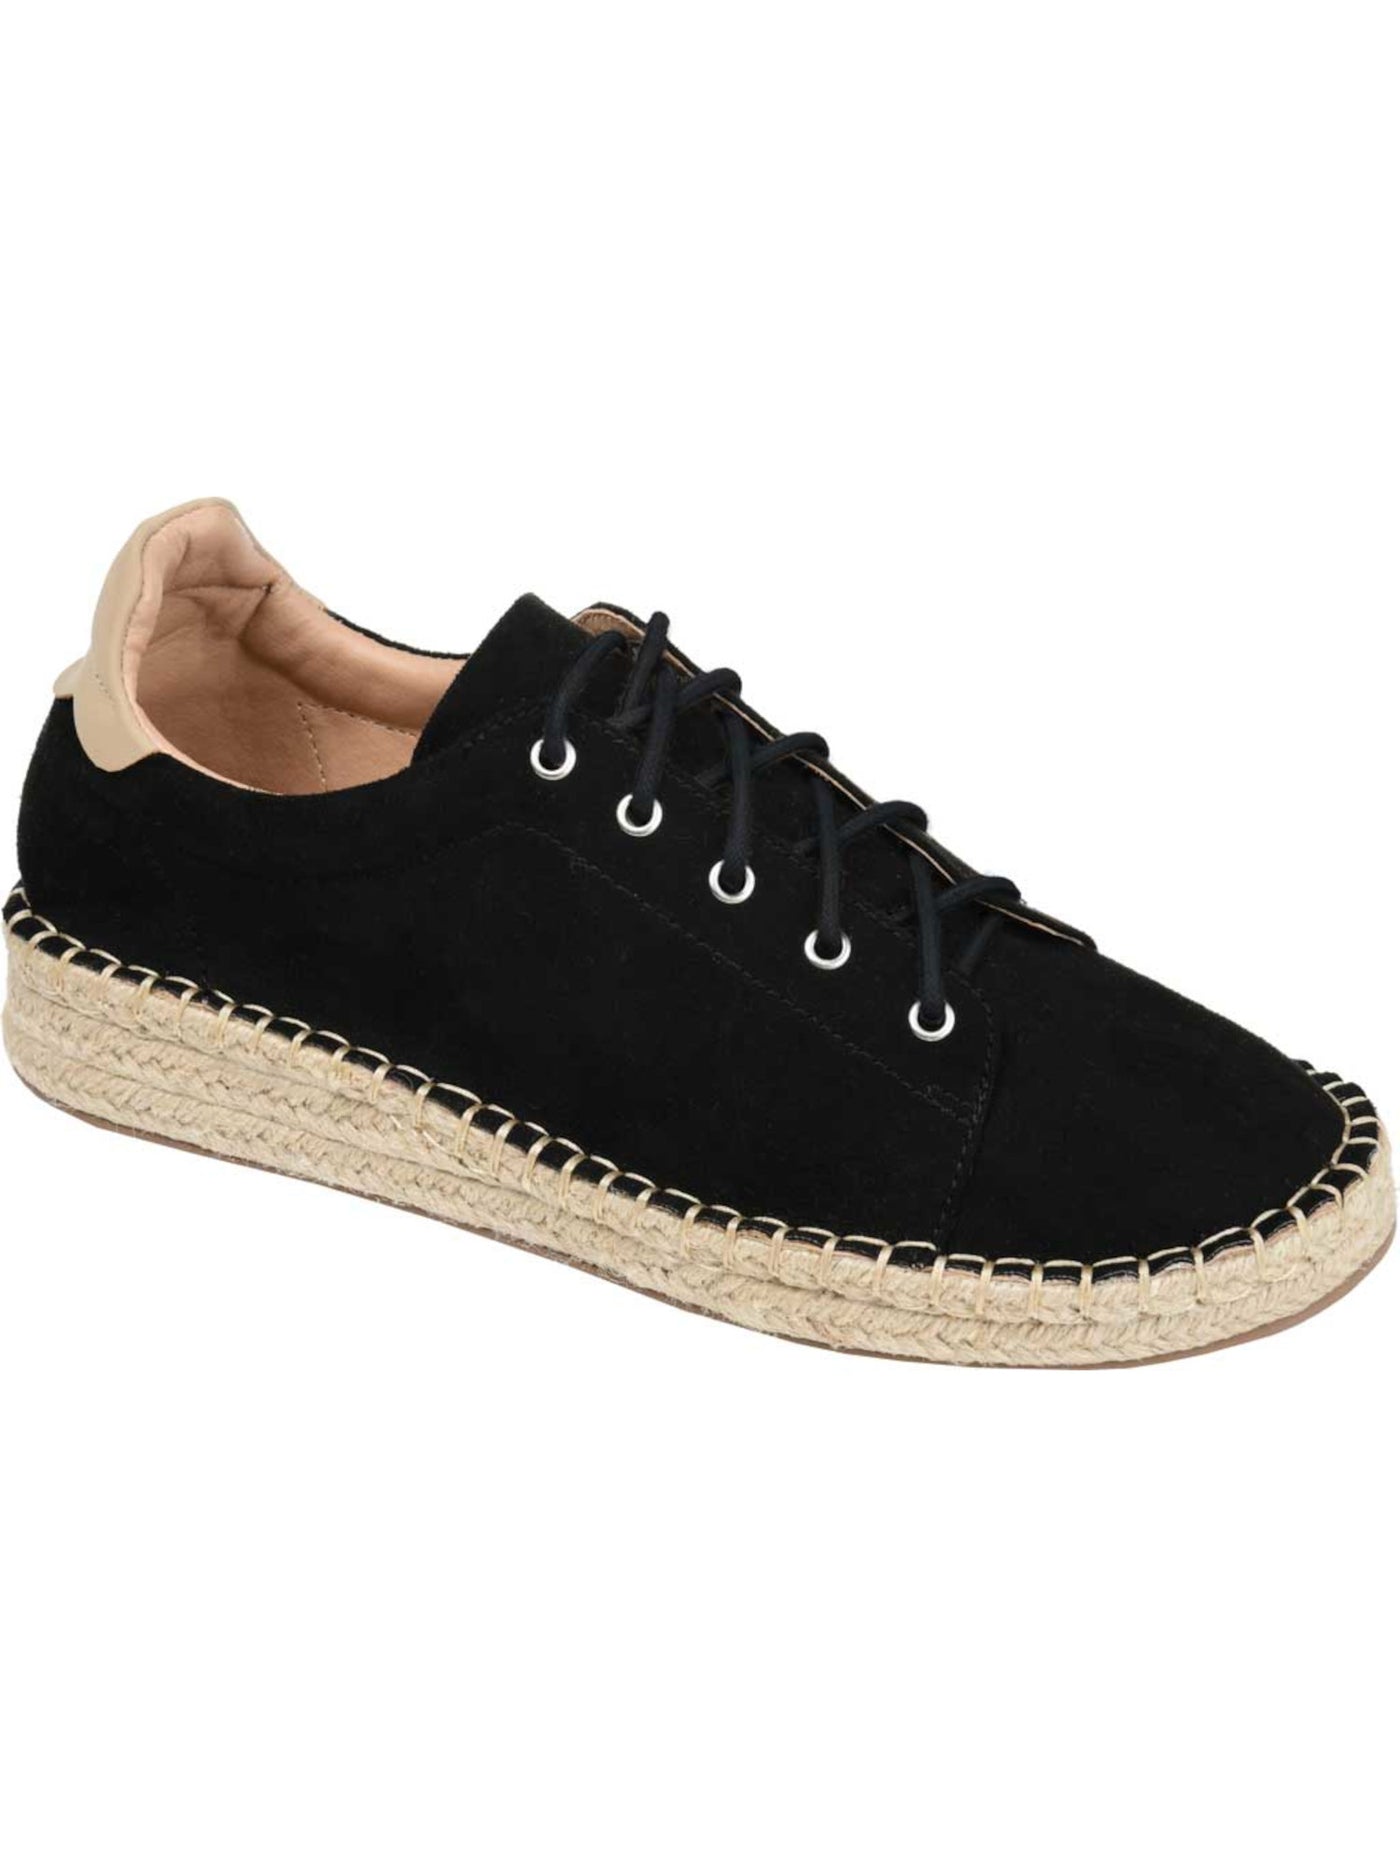 JOURNEE COLLECTION Womens Black Espadrille Detail Whipstitch Accent 1/2" Platform Cushioned Jordi Round Toe Wedge Lace-Up Sneakers Shoes 11 M